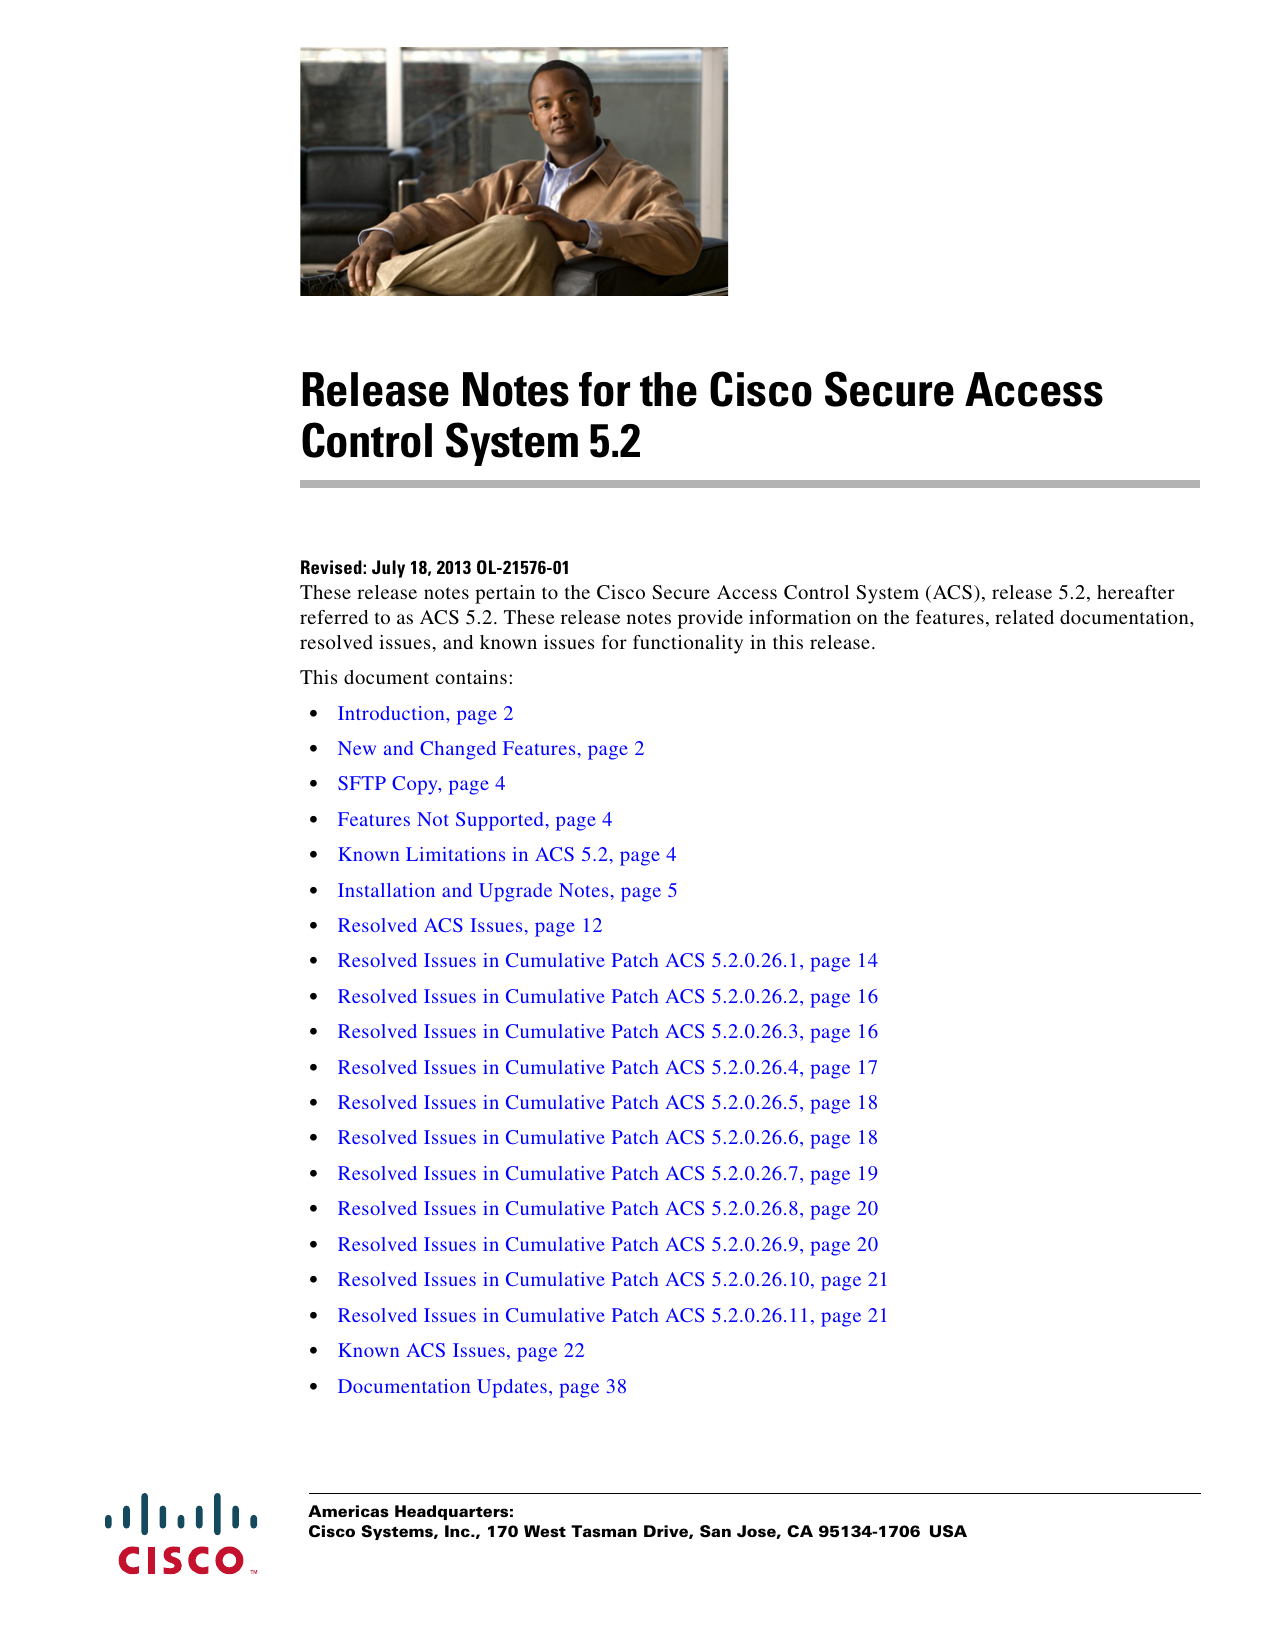 migration guide for cisco secure access control system 5.5